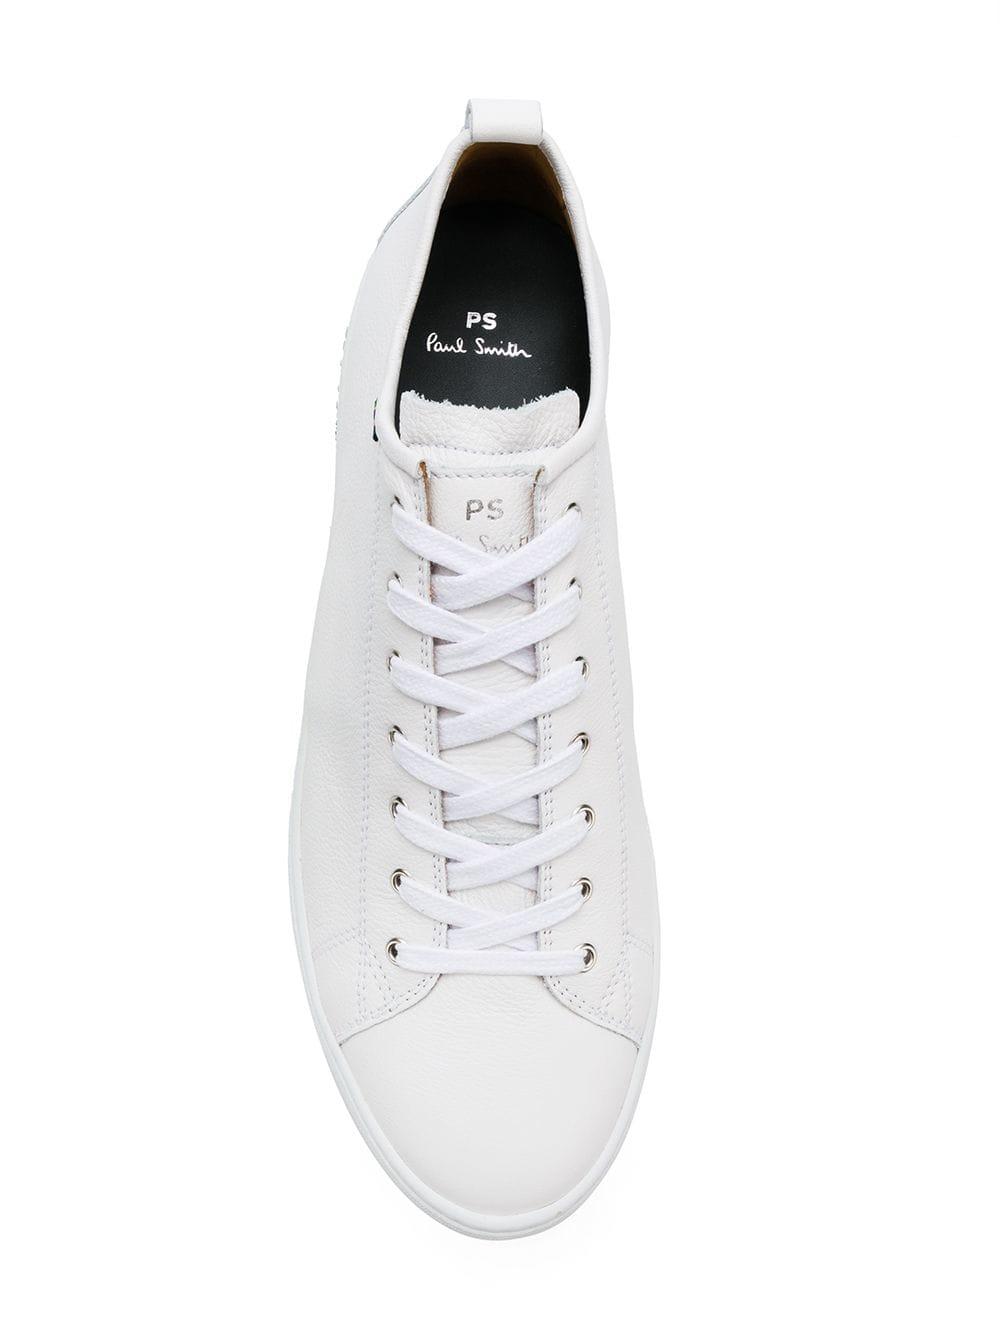 PS by Paul Smith Leather Classic Low-top Sneakers in White for Men - Lyst